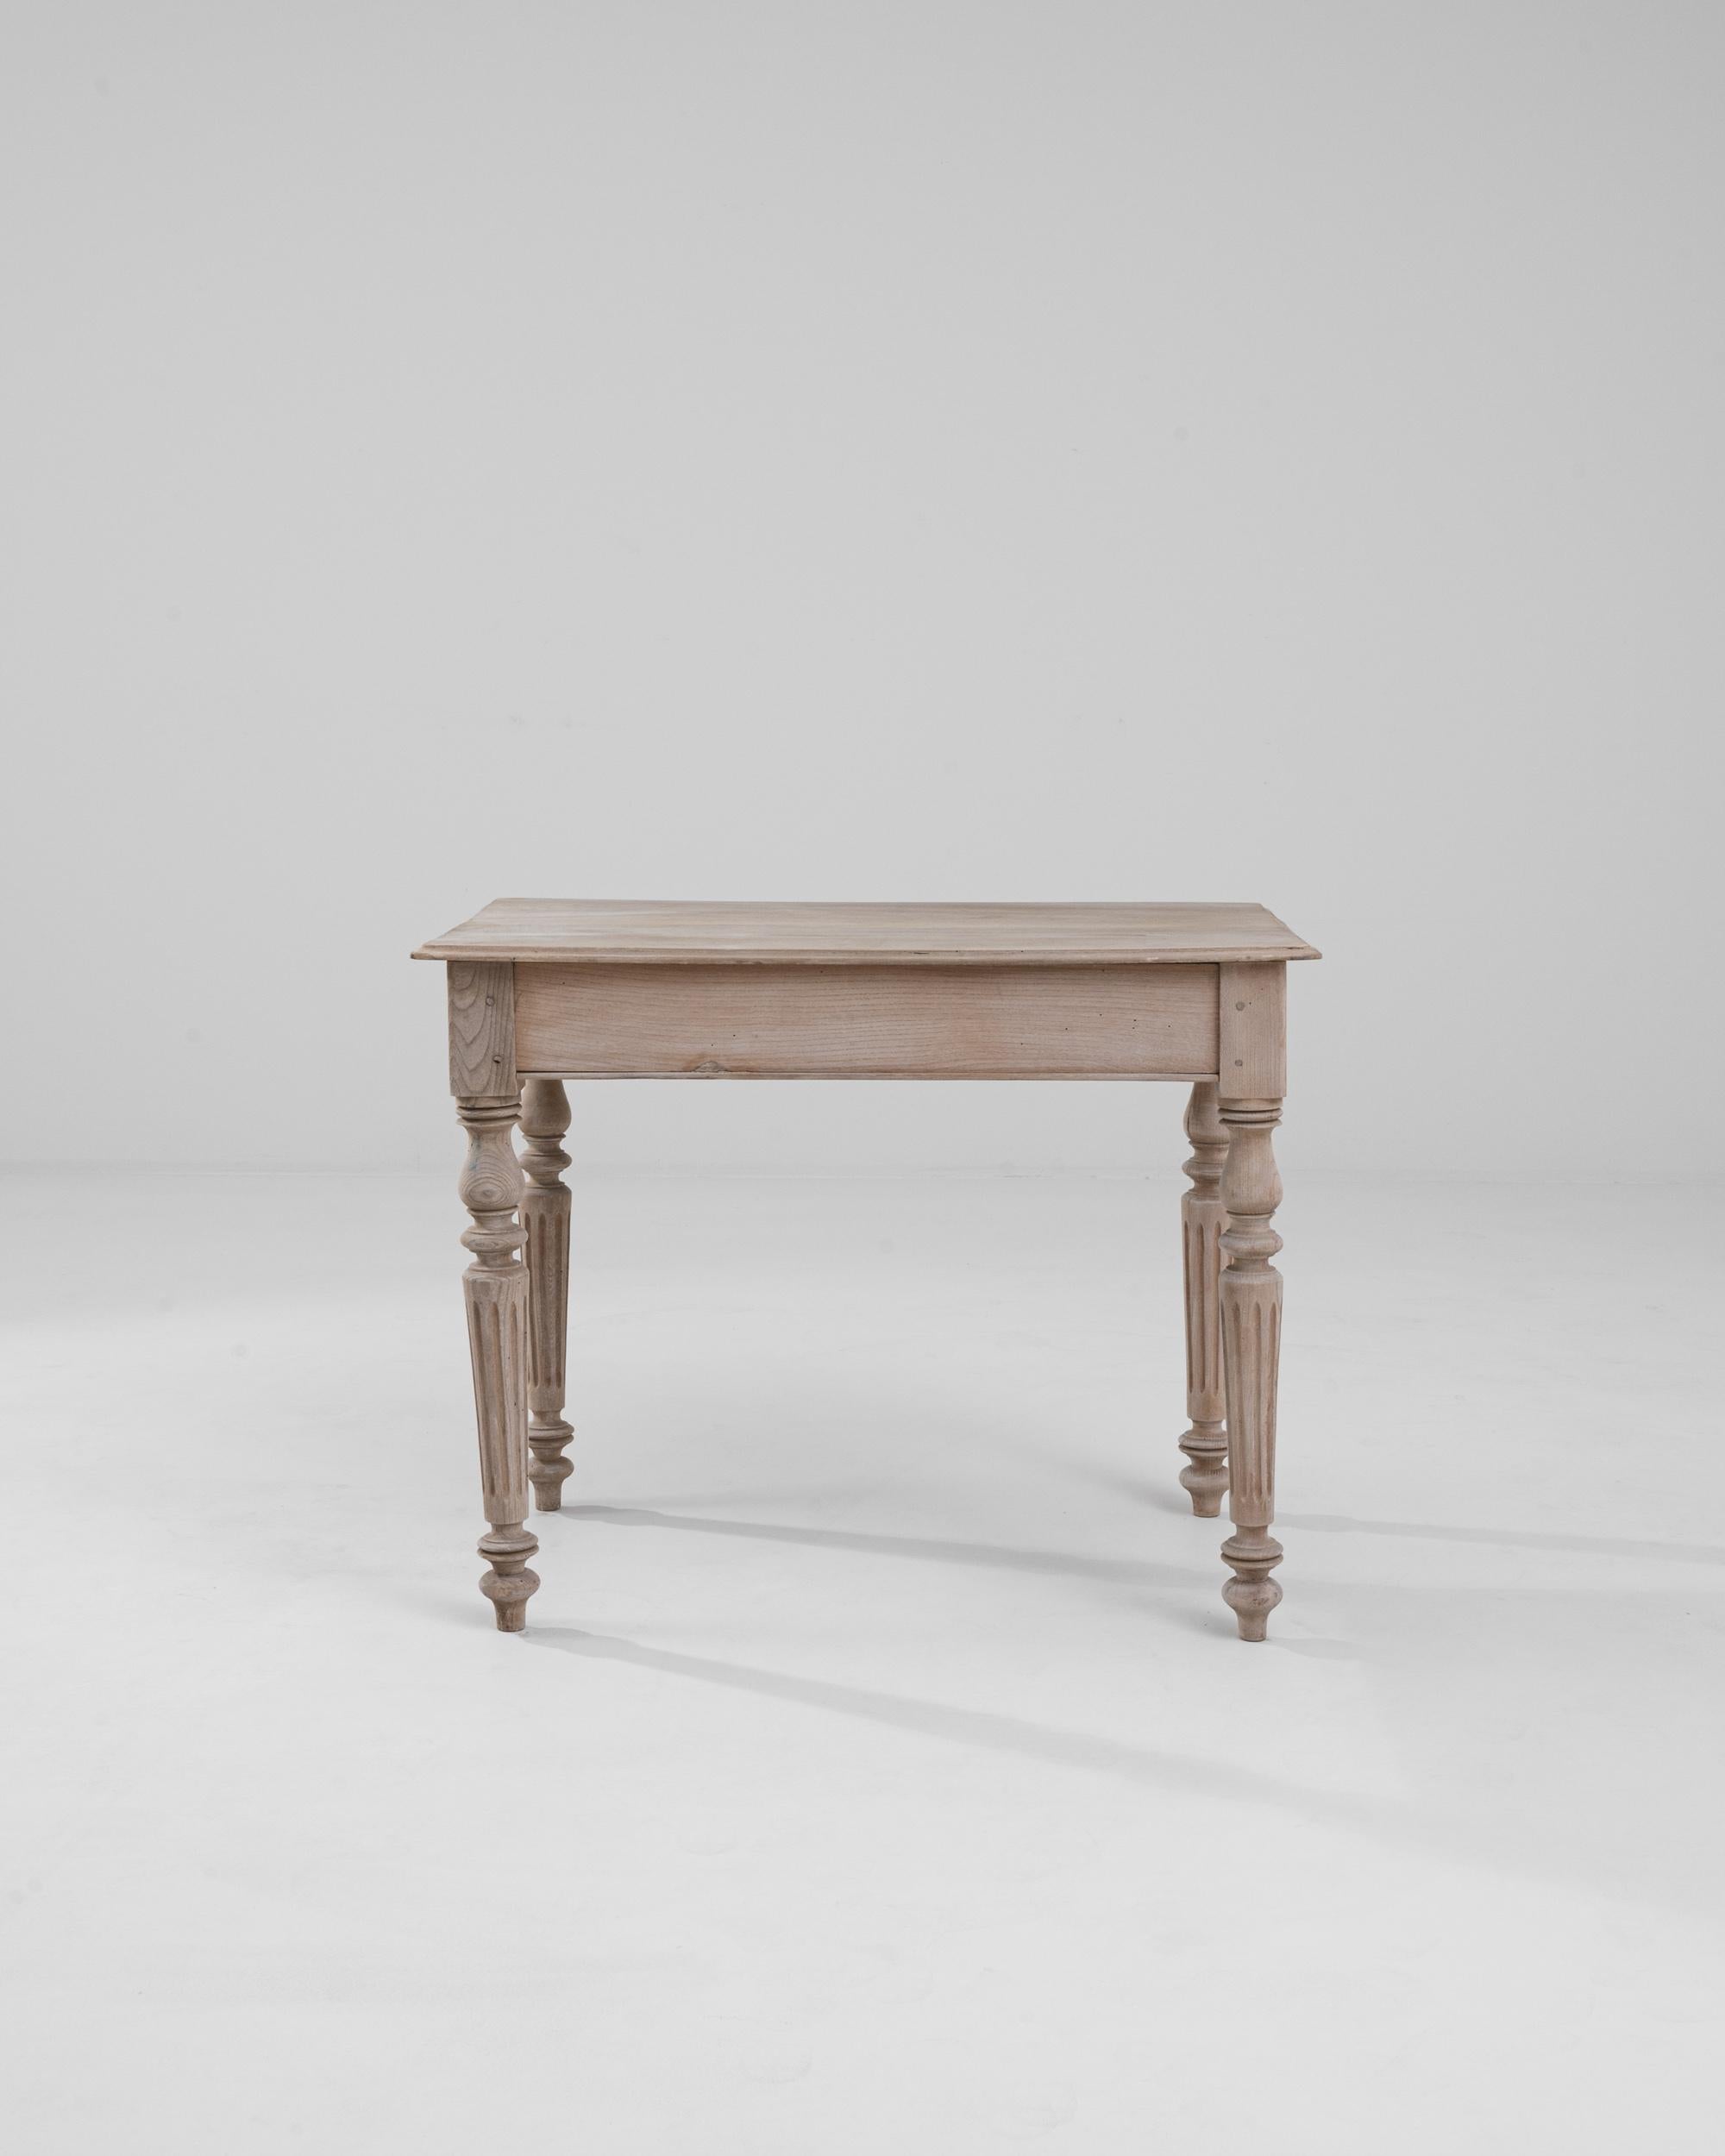 This vintage oak side table offers a graceful silhouette in natural oak. Made in France at the turn of the century, the design incorporates Neoclassical elements into a restrained and balanced composition. Fluted, tapered legs create an elegant